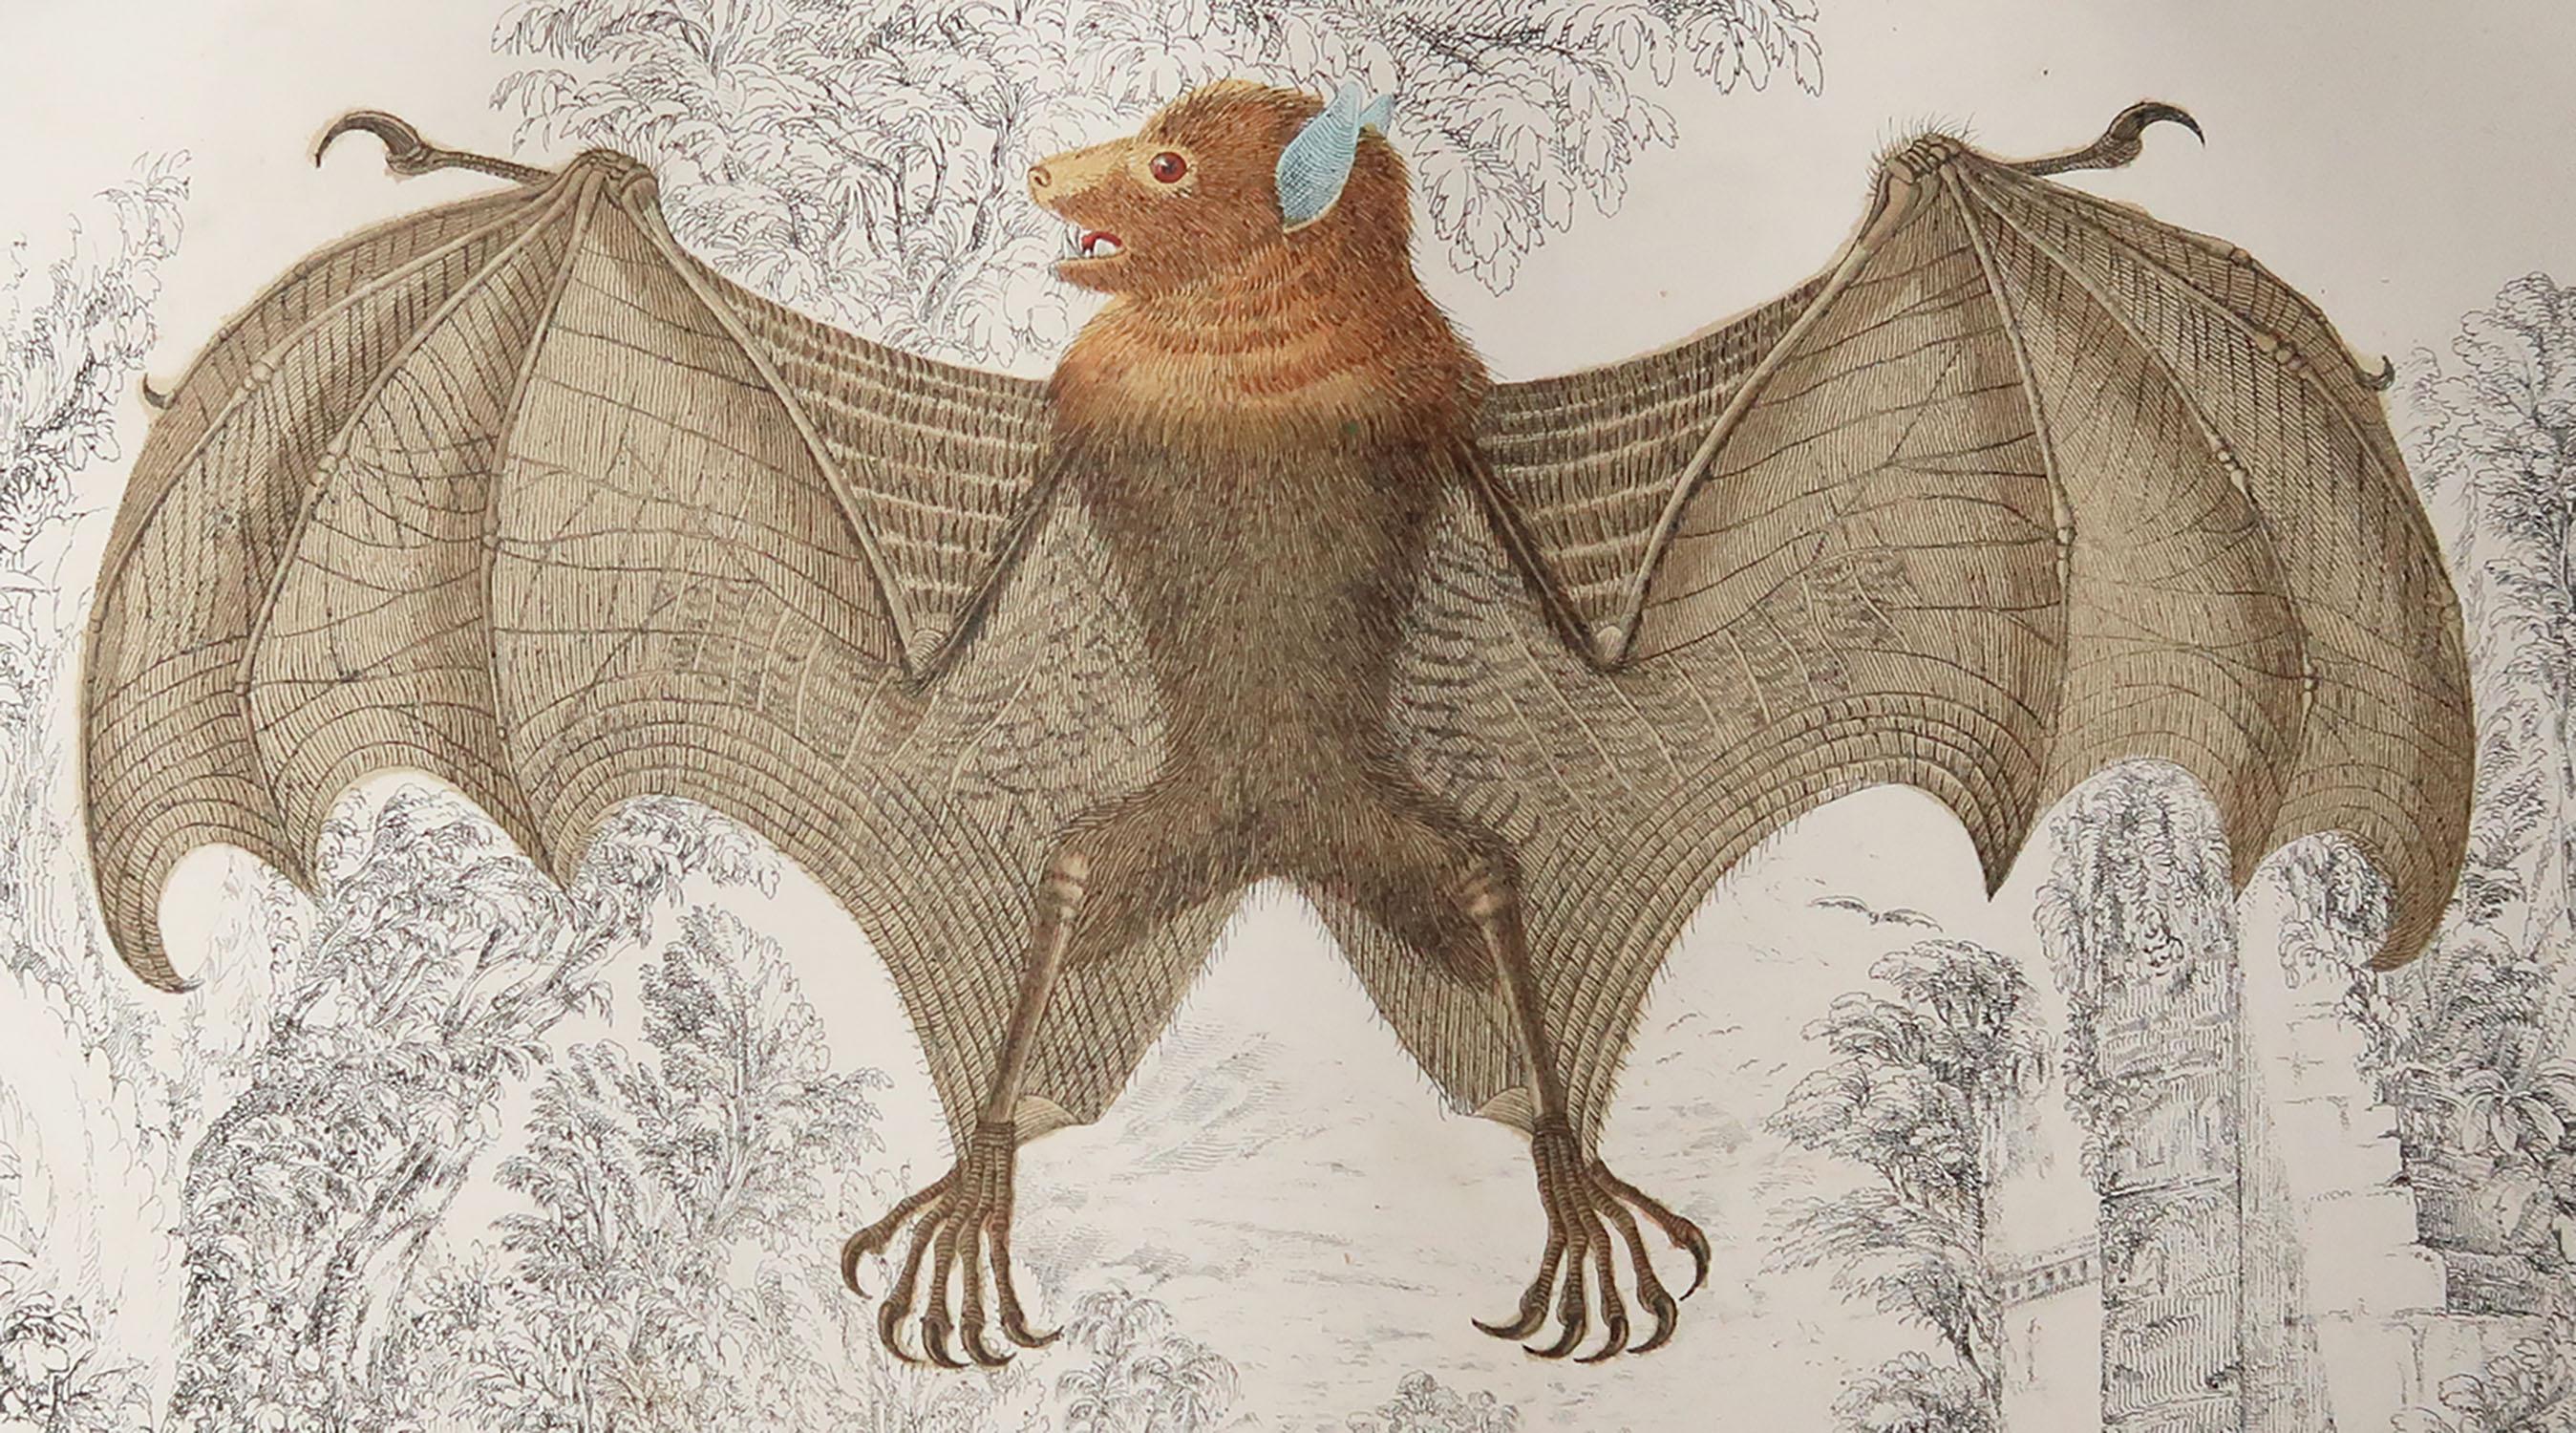 Great image of a bat.

Unframed. It gives you the option of perhaps making a set up using your own choice of frames.

Lithograph after Cpt. brown with original hand color.

Published: 1847.

Repair to a minor edge tear at top

Free